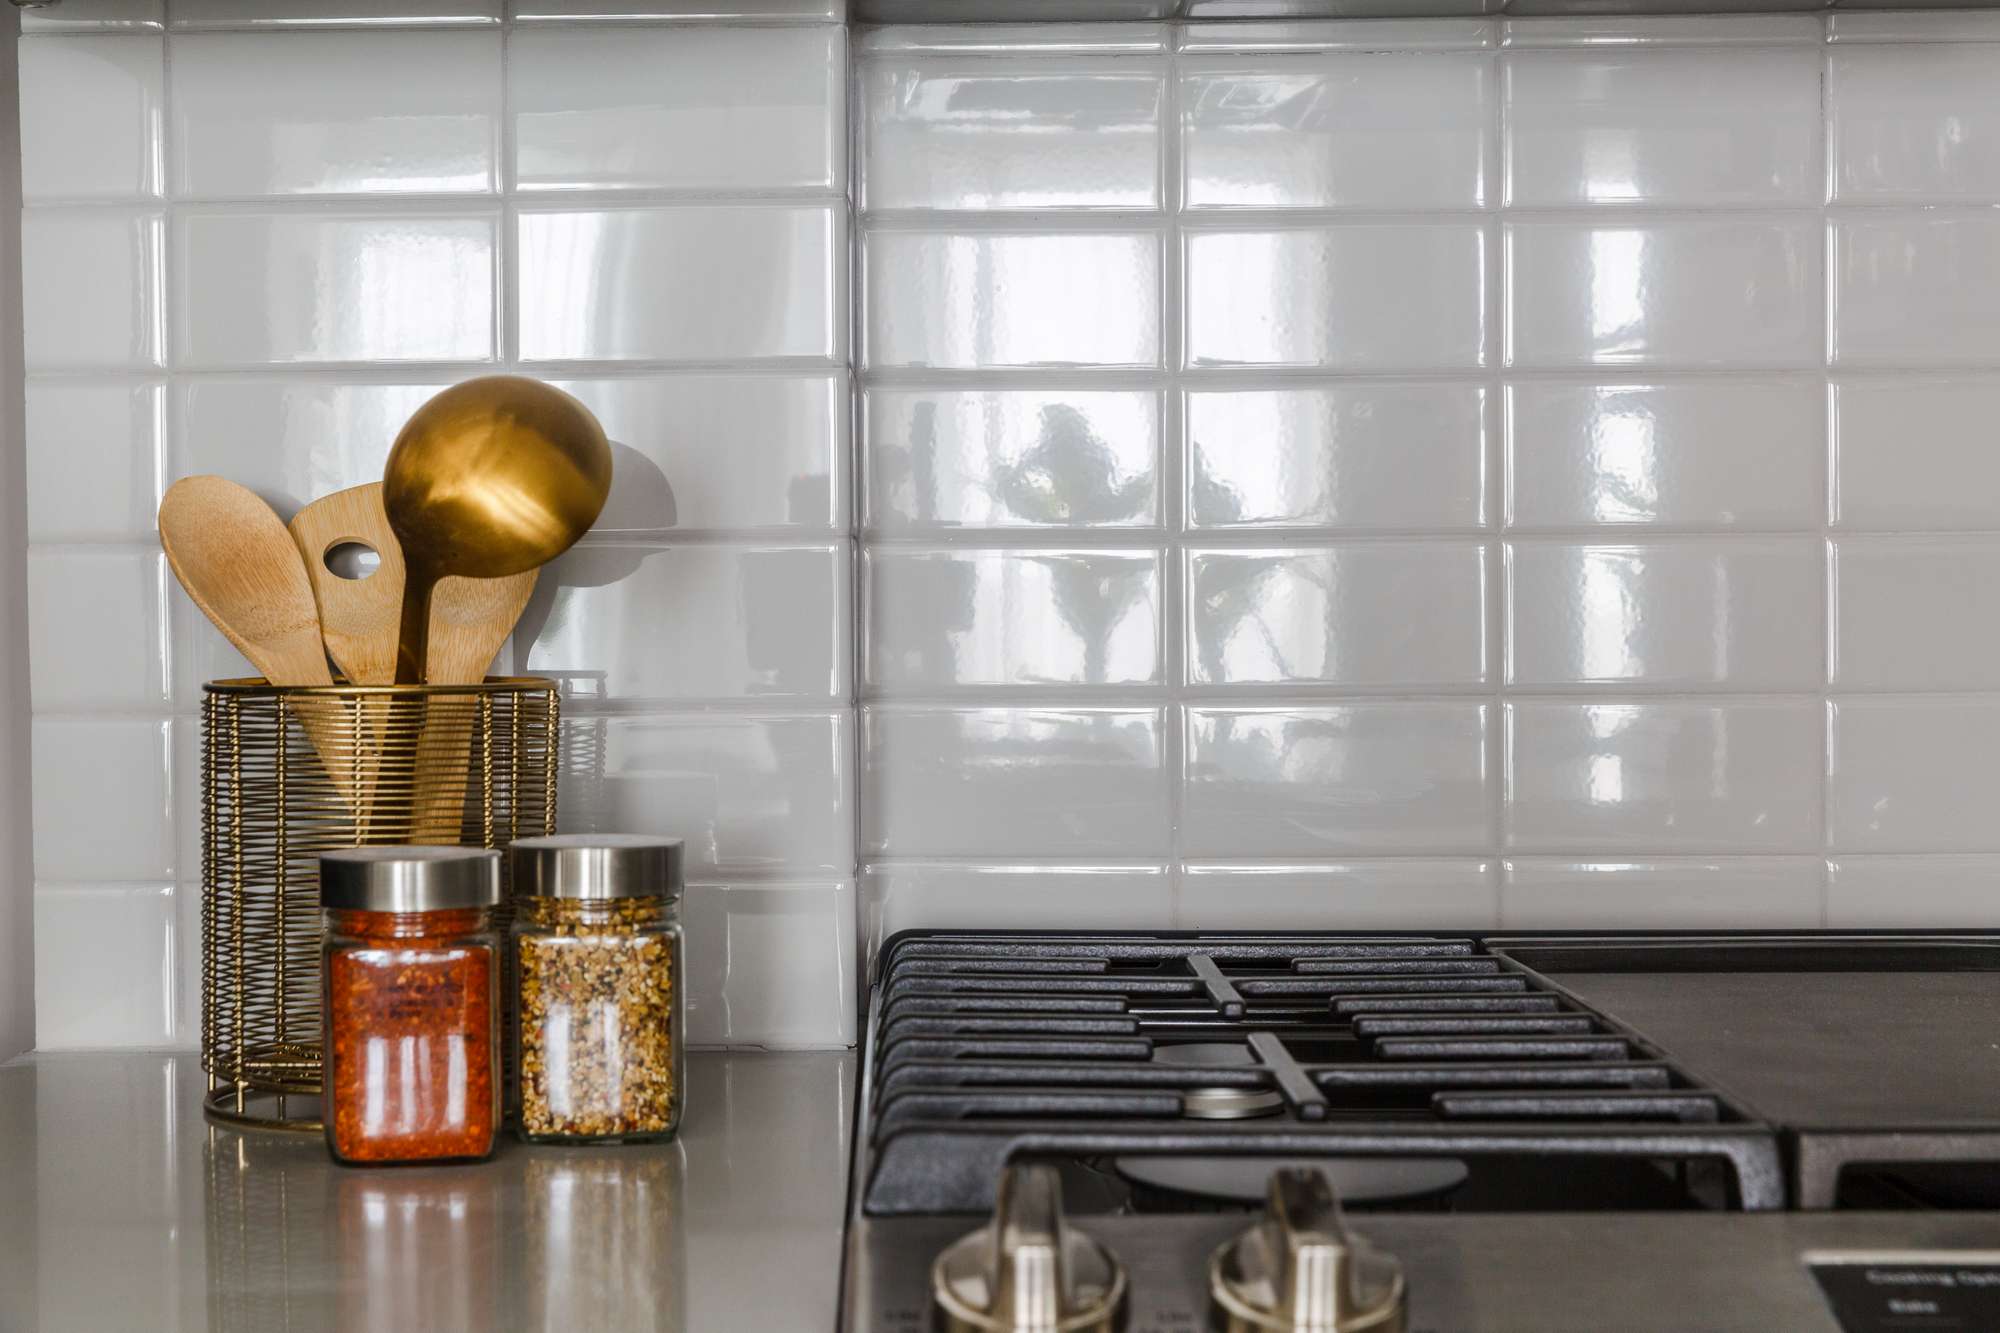 Kitchen detail of stovetop, white subway tile and counter with cooking utensils and spices